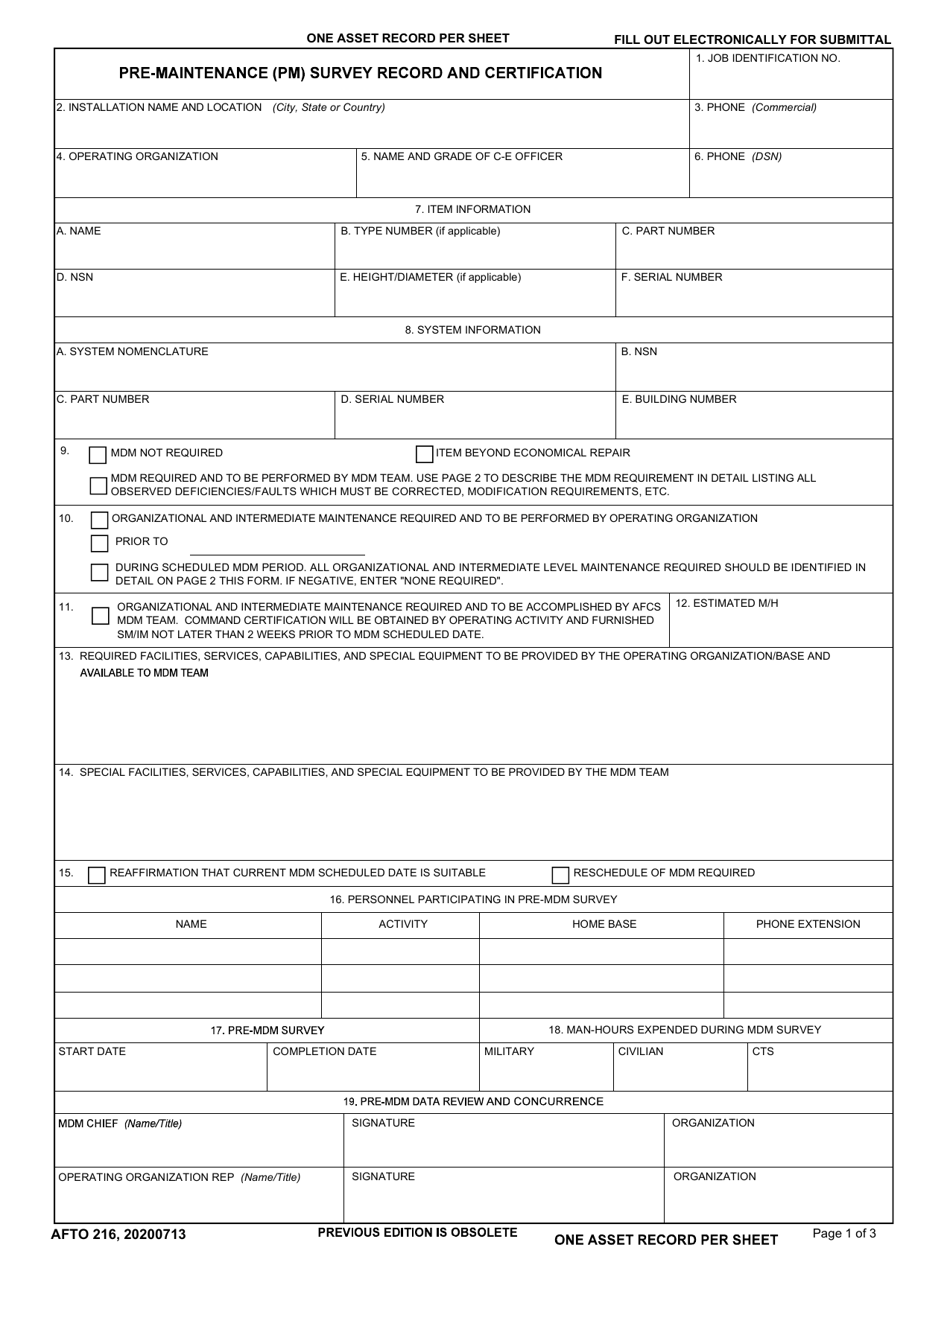 AFTO Form 216 Pre-maintenance (Pm) Survey Record and Certification, Page 1